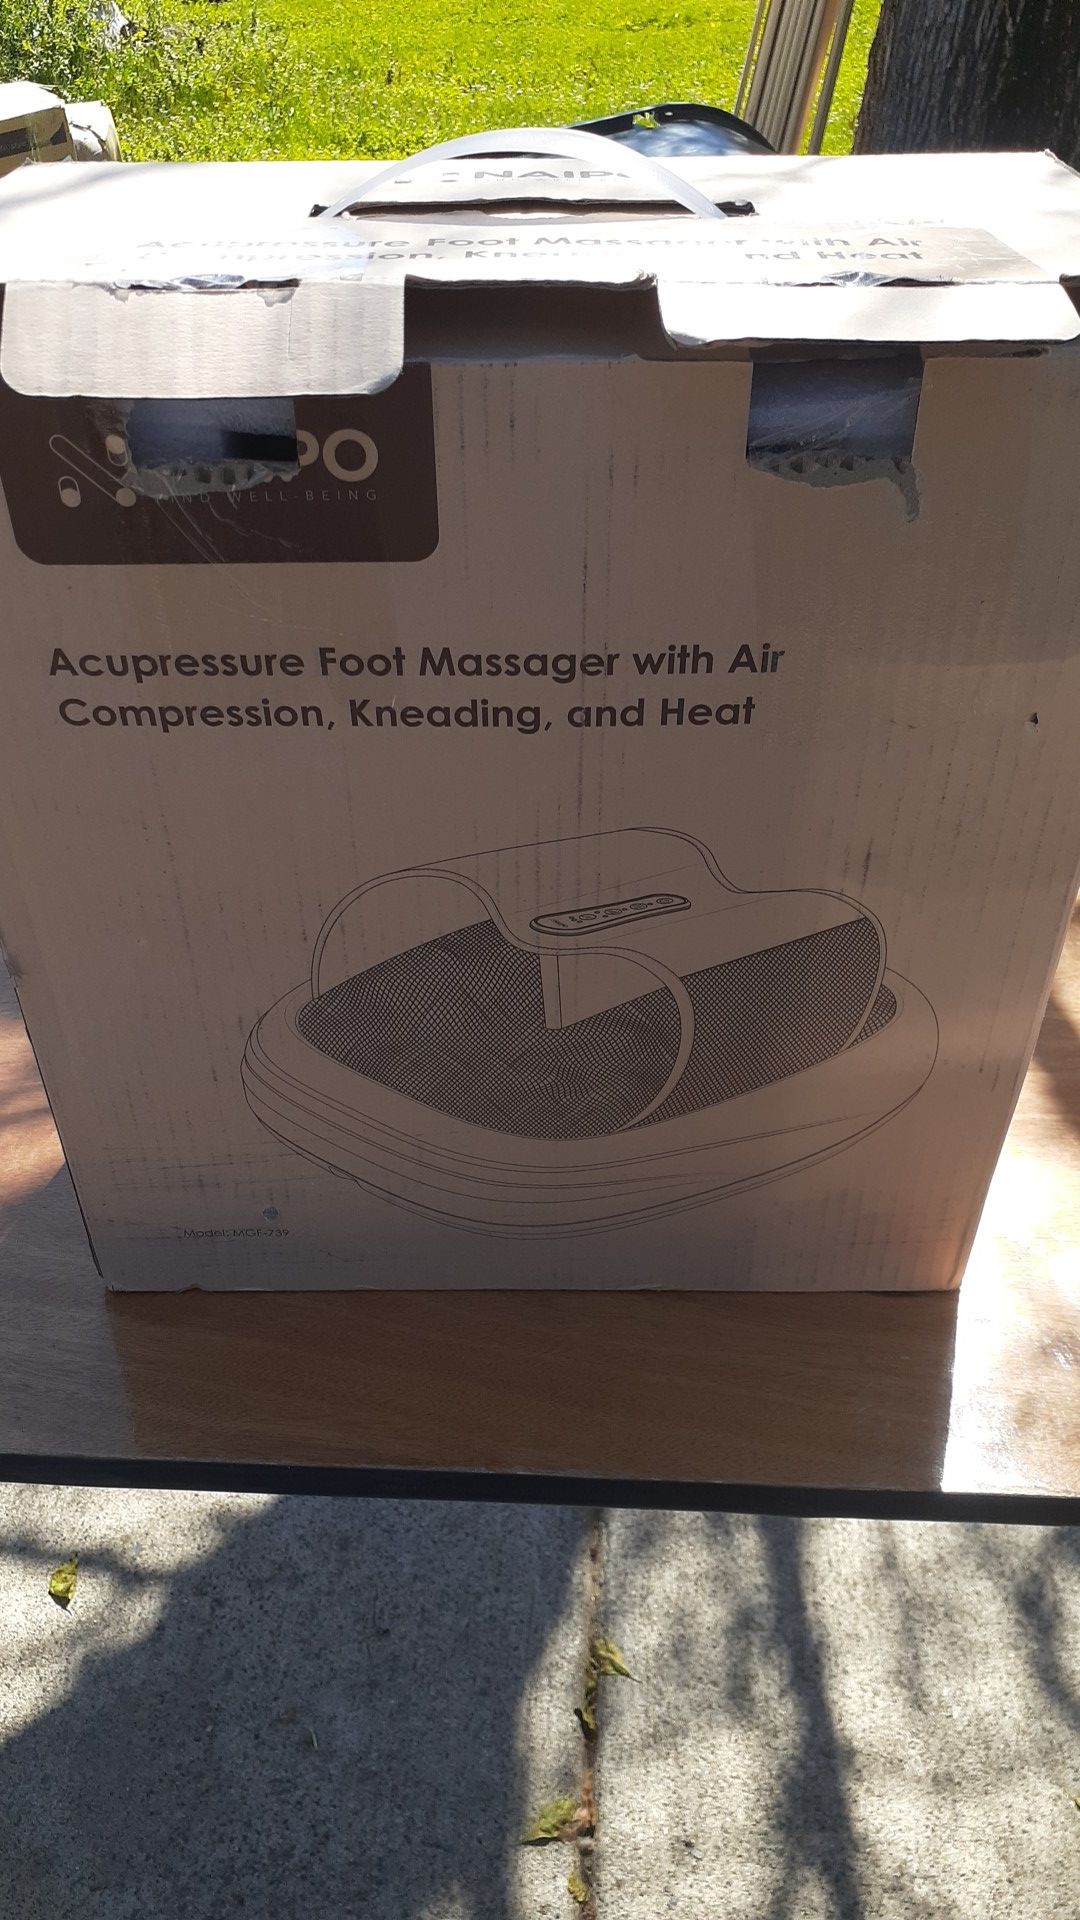 Naipo foot massager with air compression heat and kneading